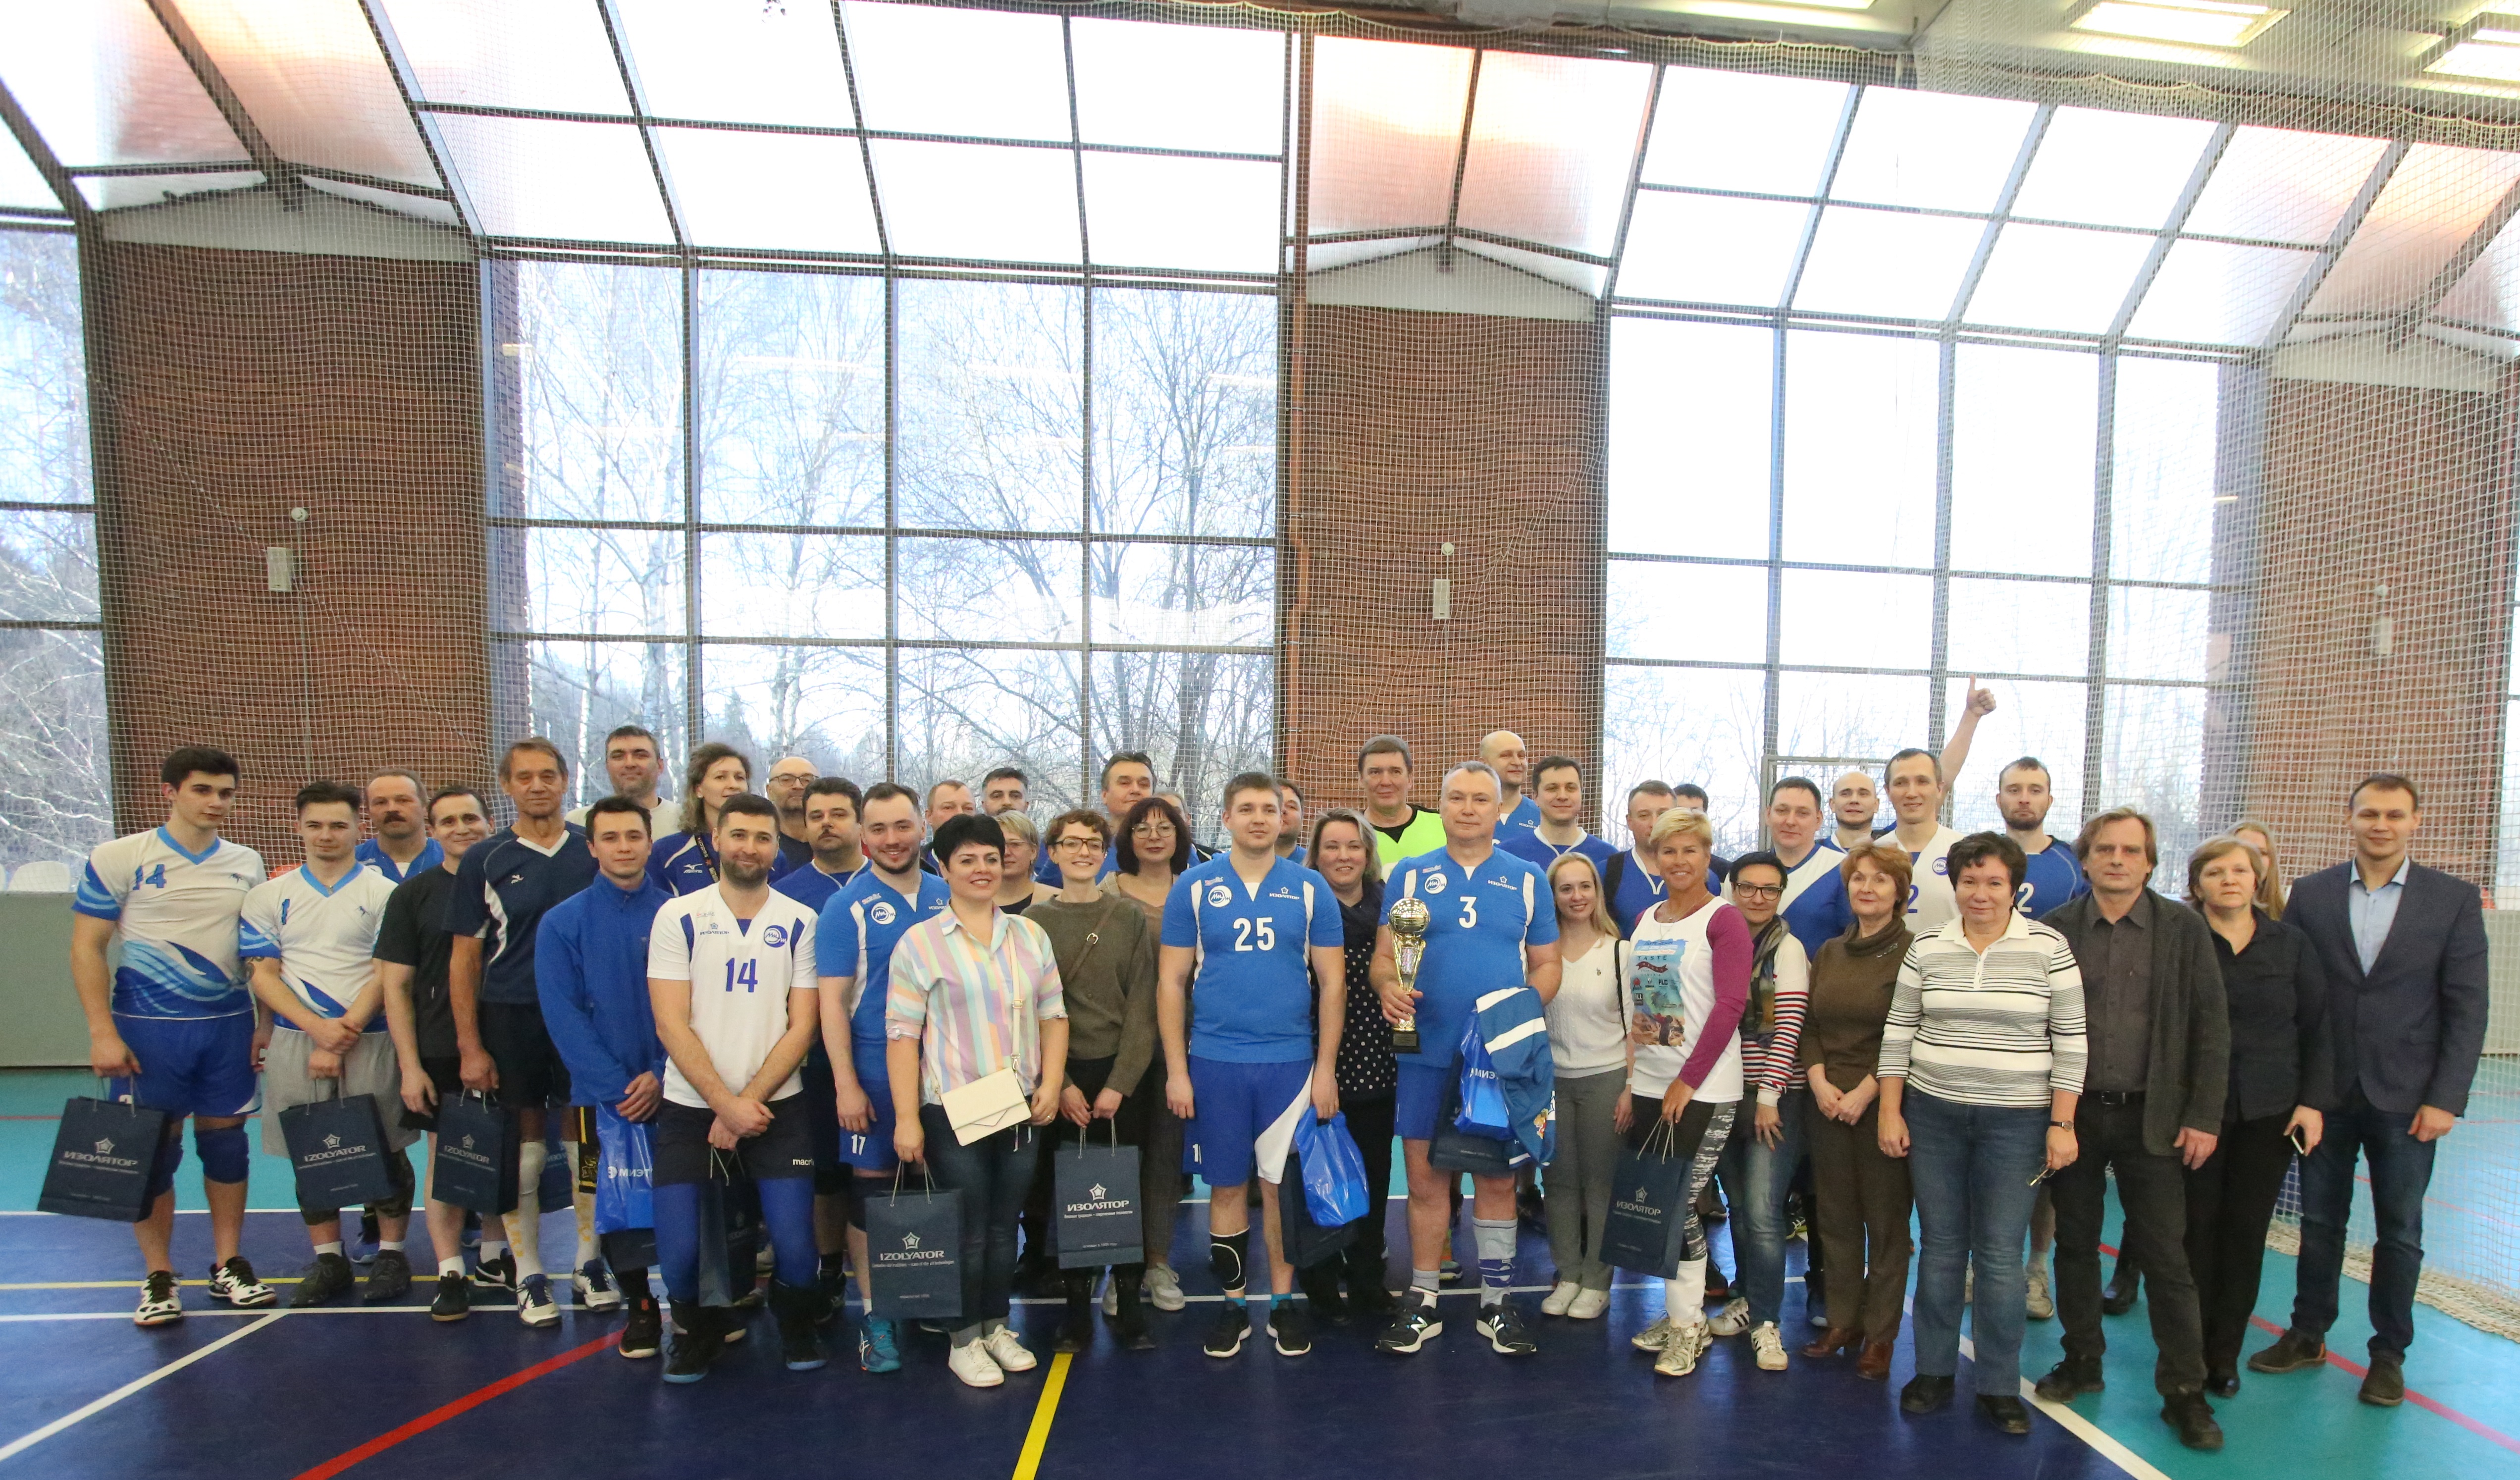 All participants and fans of friendly matches in MIET. Friendship won!